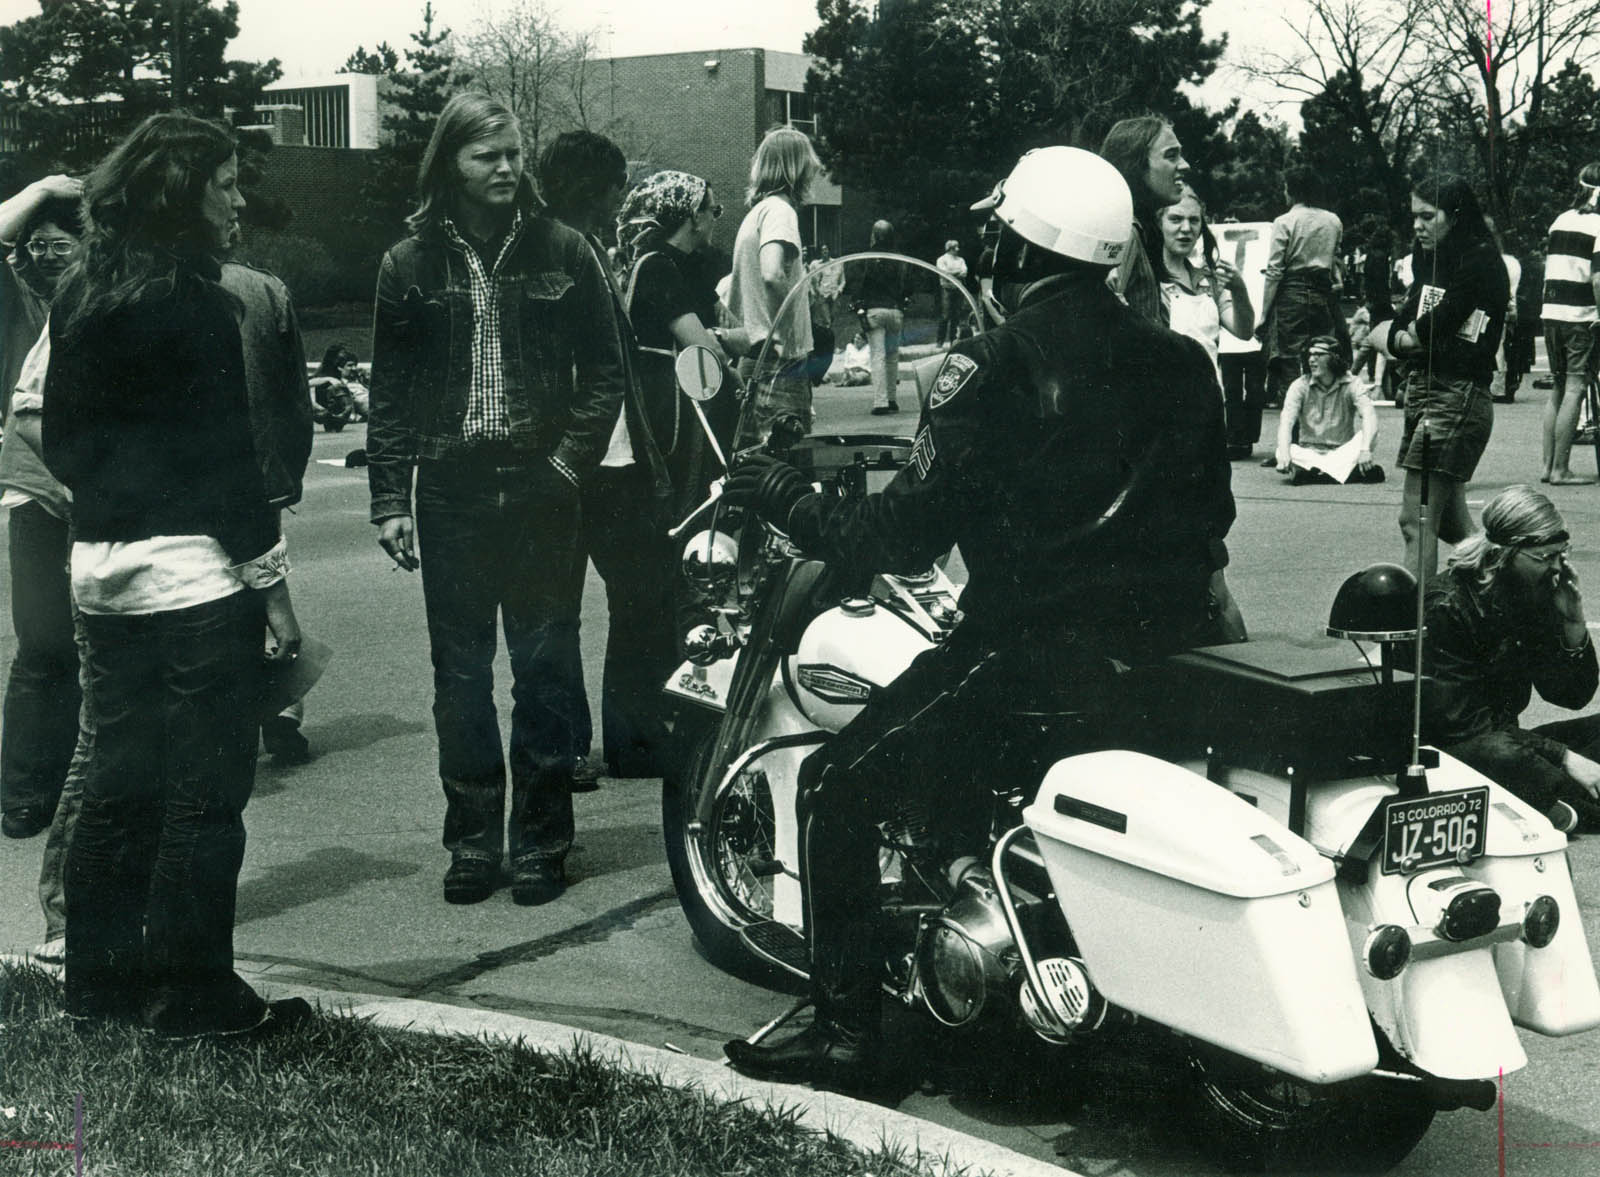 Police officer engages with student Vietnam War protestors, 1972.